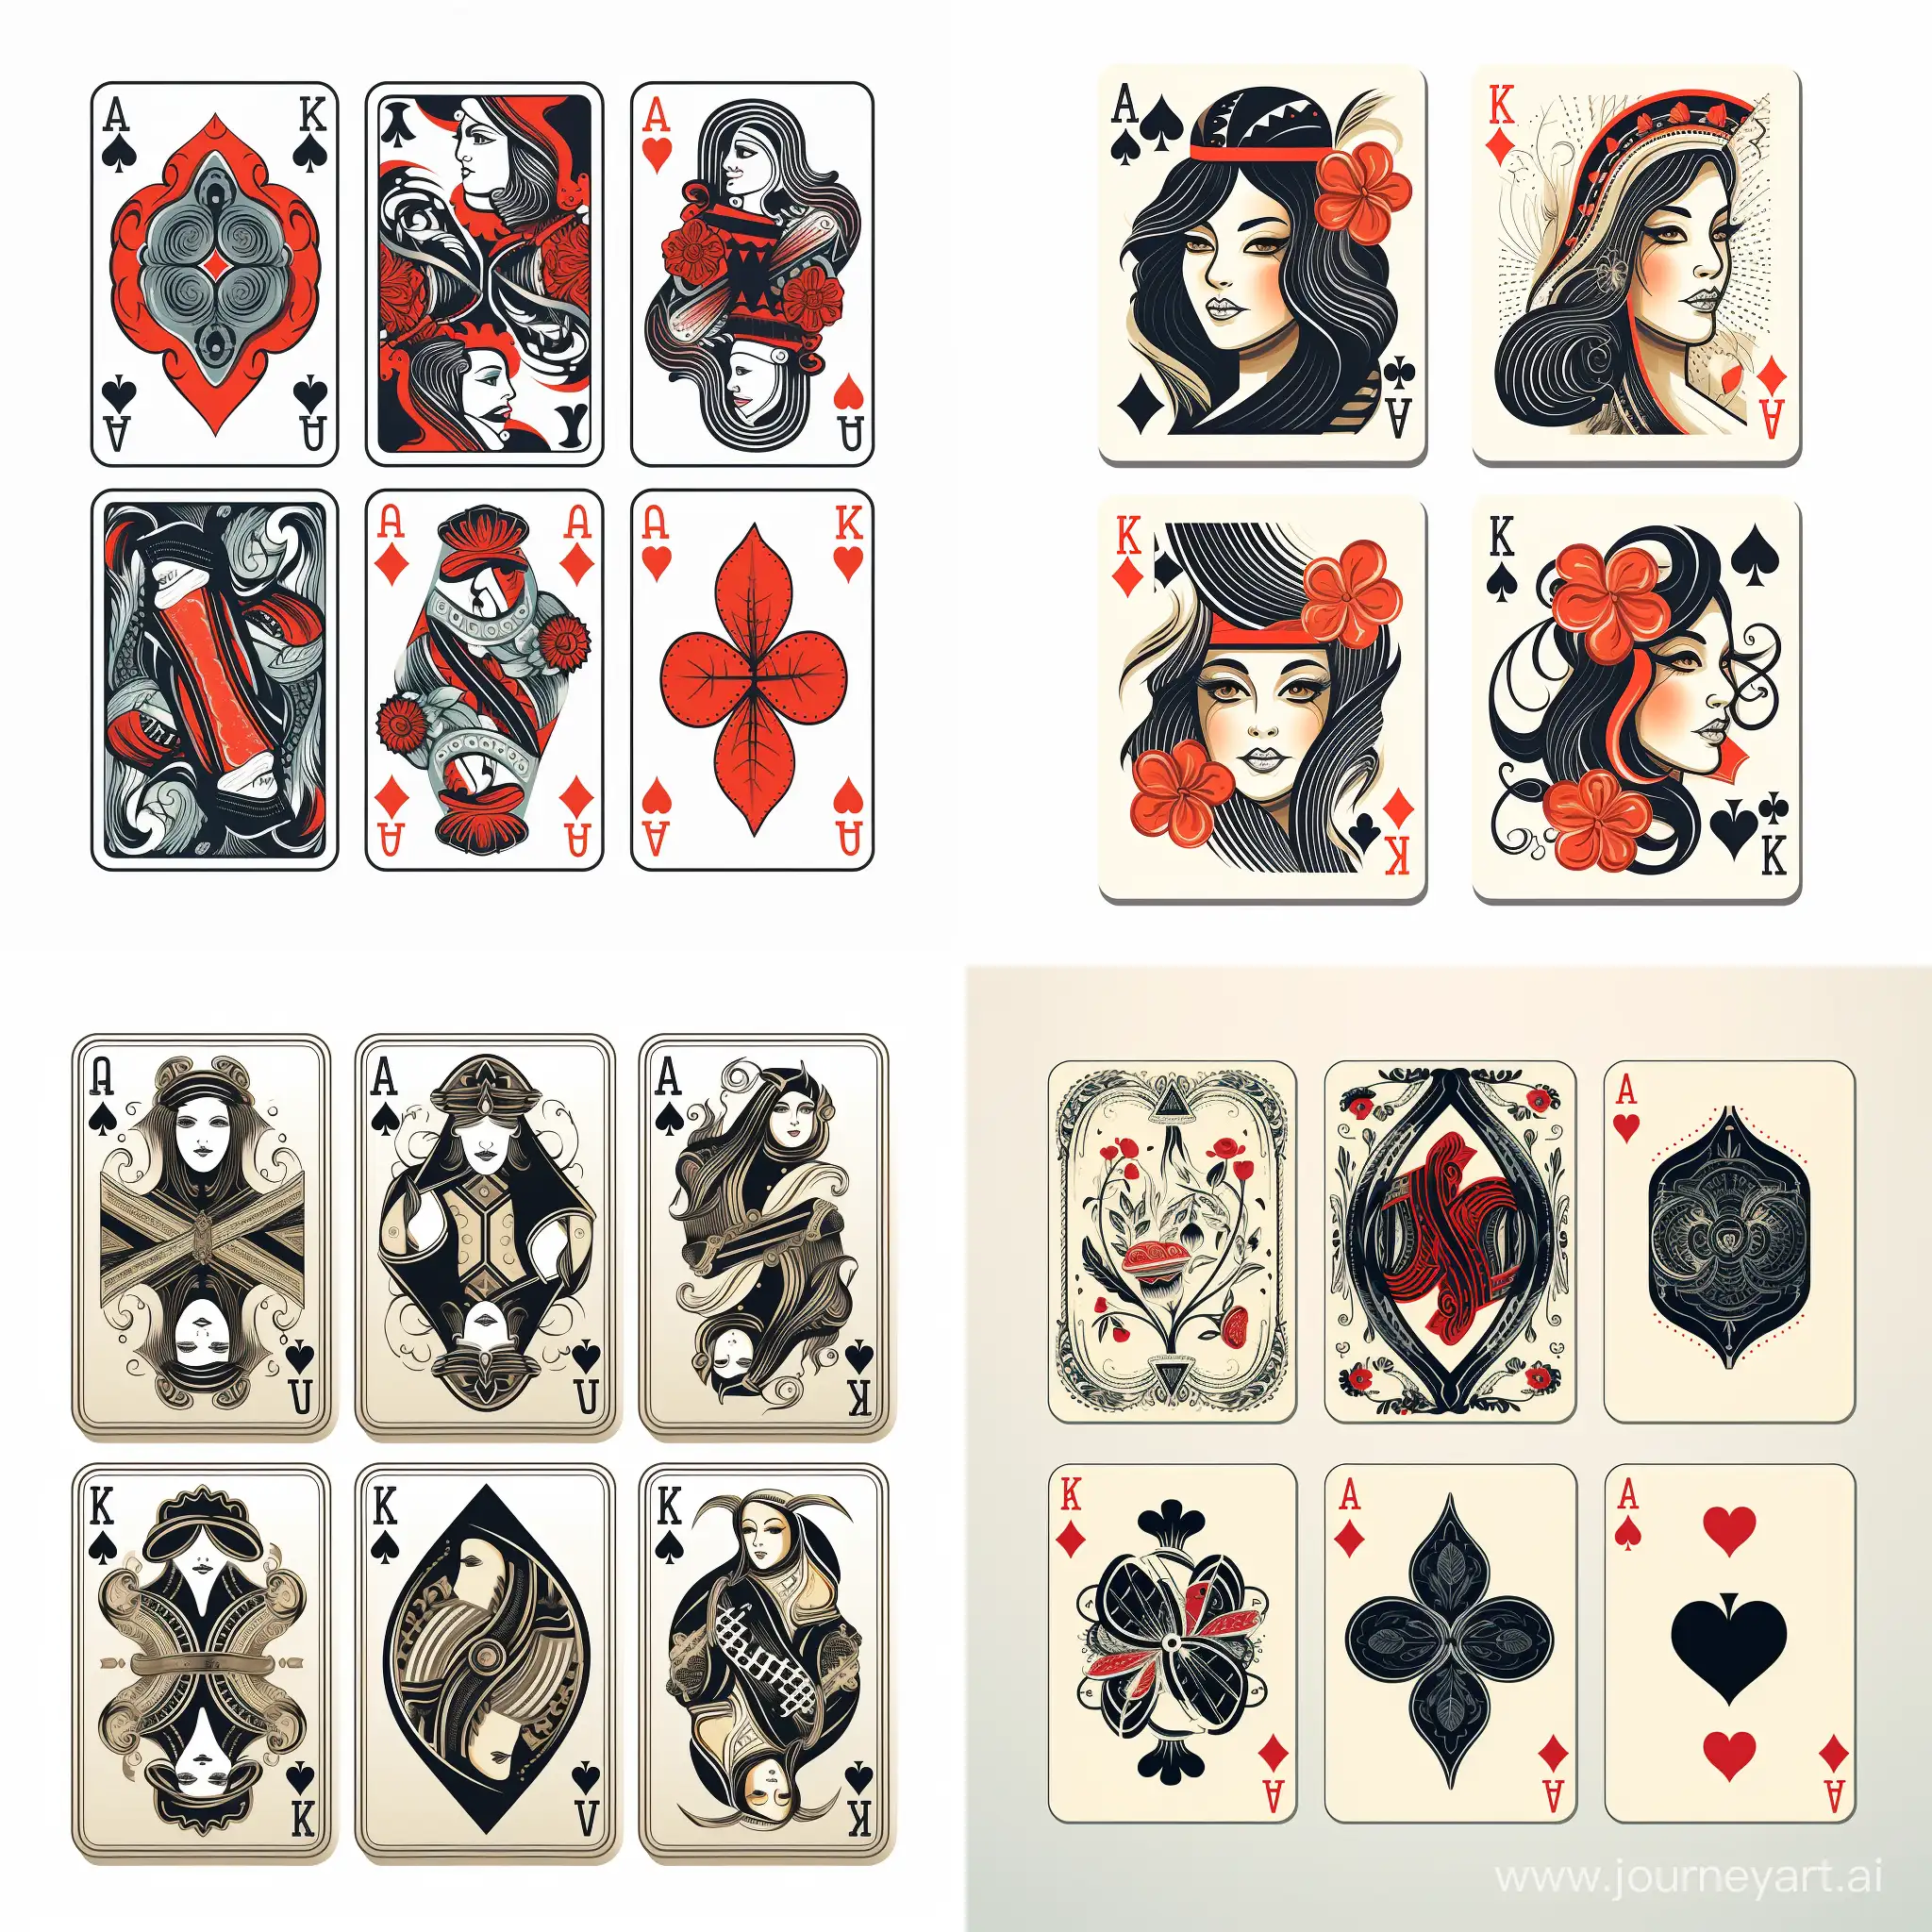 Four-Modern-Linear-Style-Playing-Card-Variants-on-White-Background